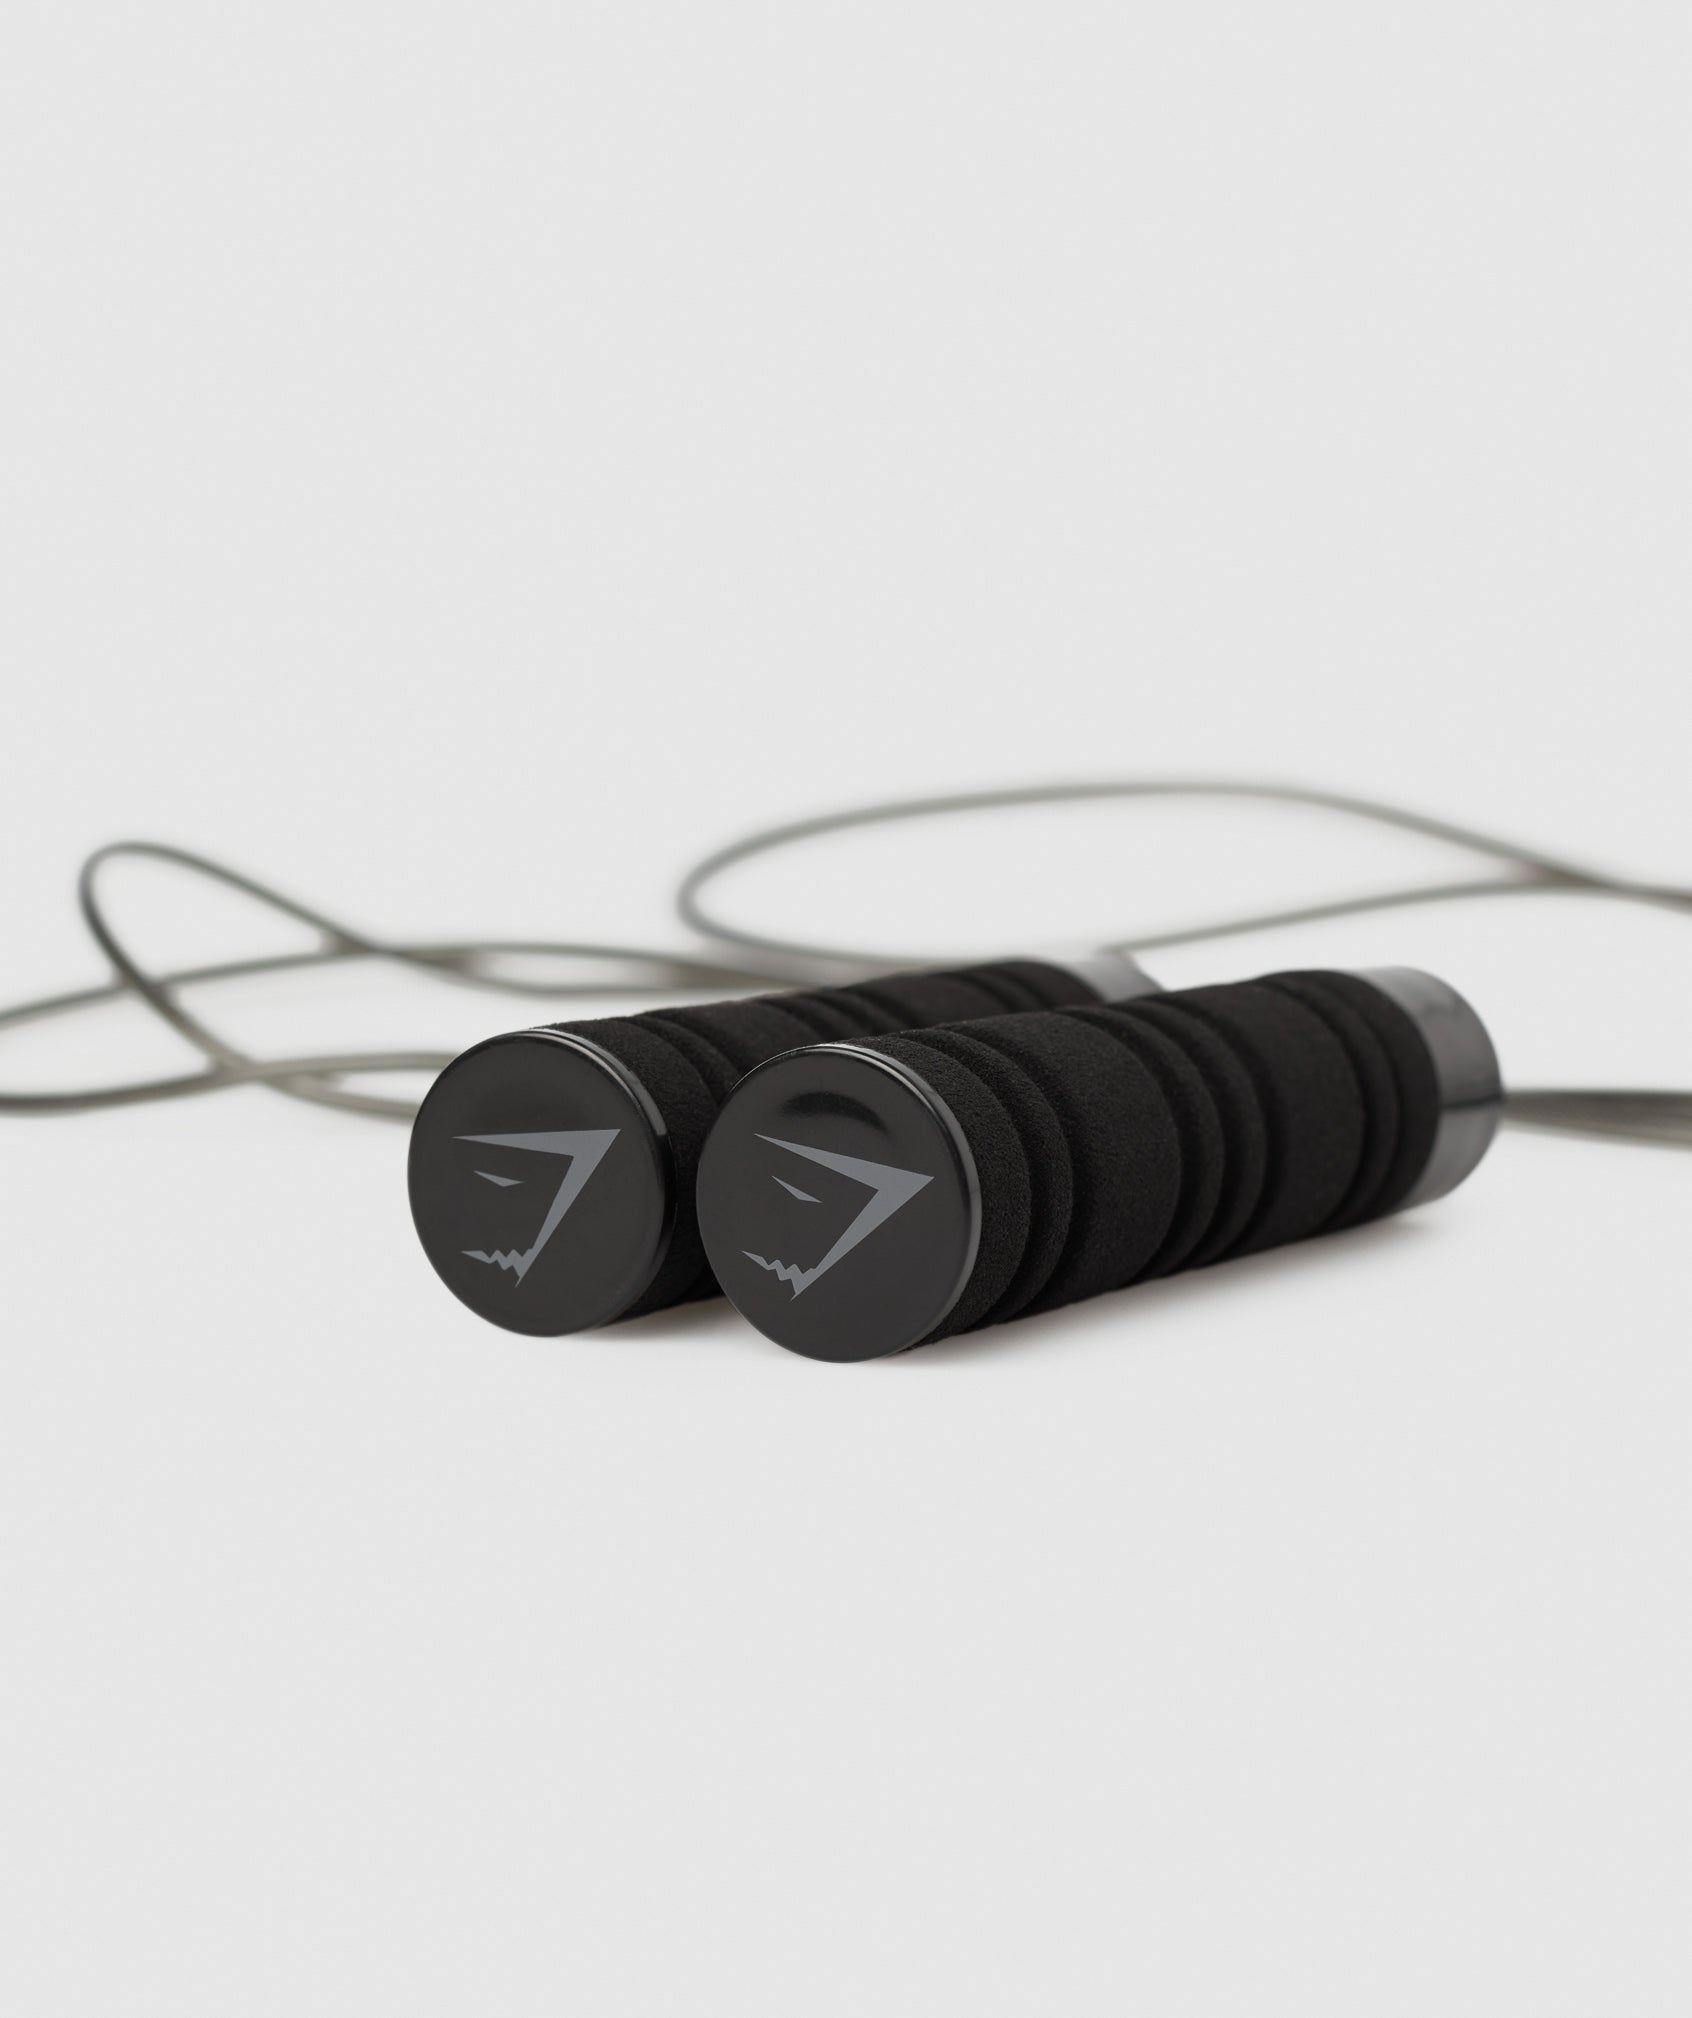 Weighted Skipping Rope in Black